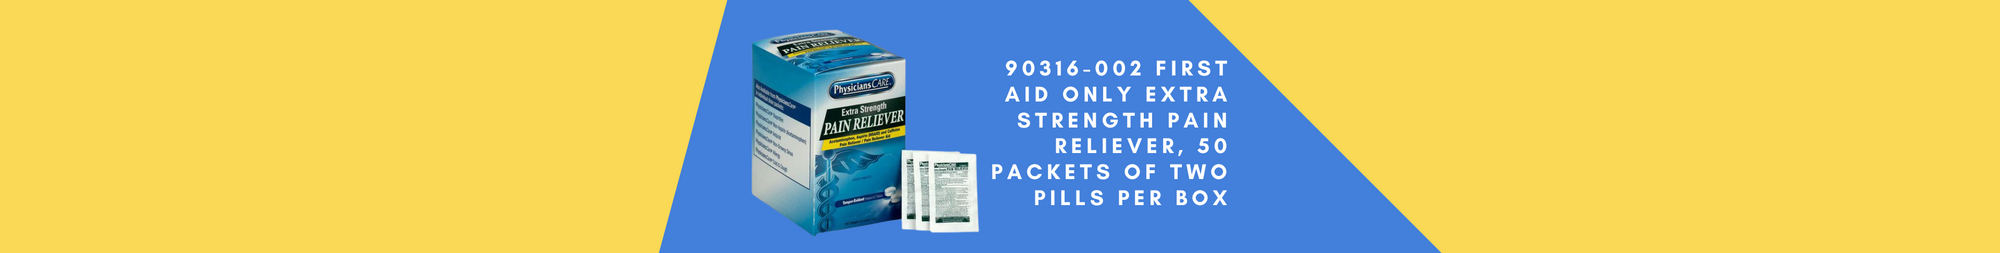 Extra-Strength Pain Reliever